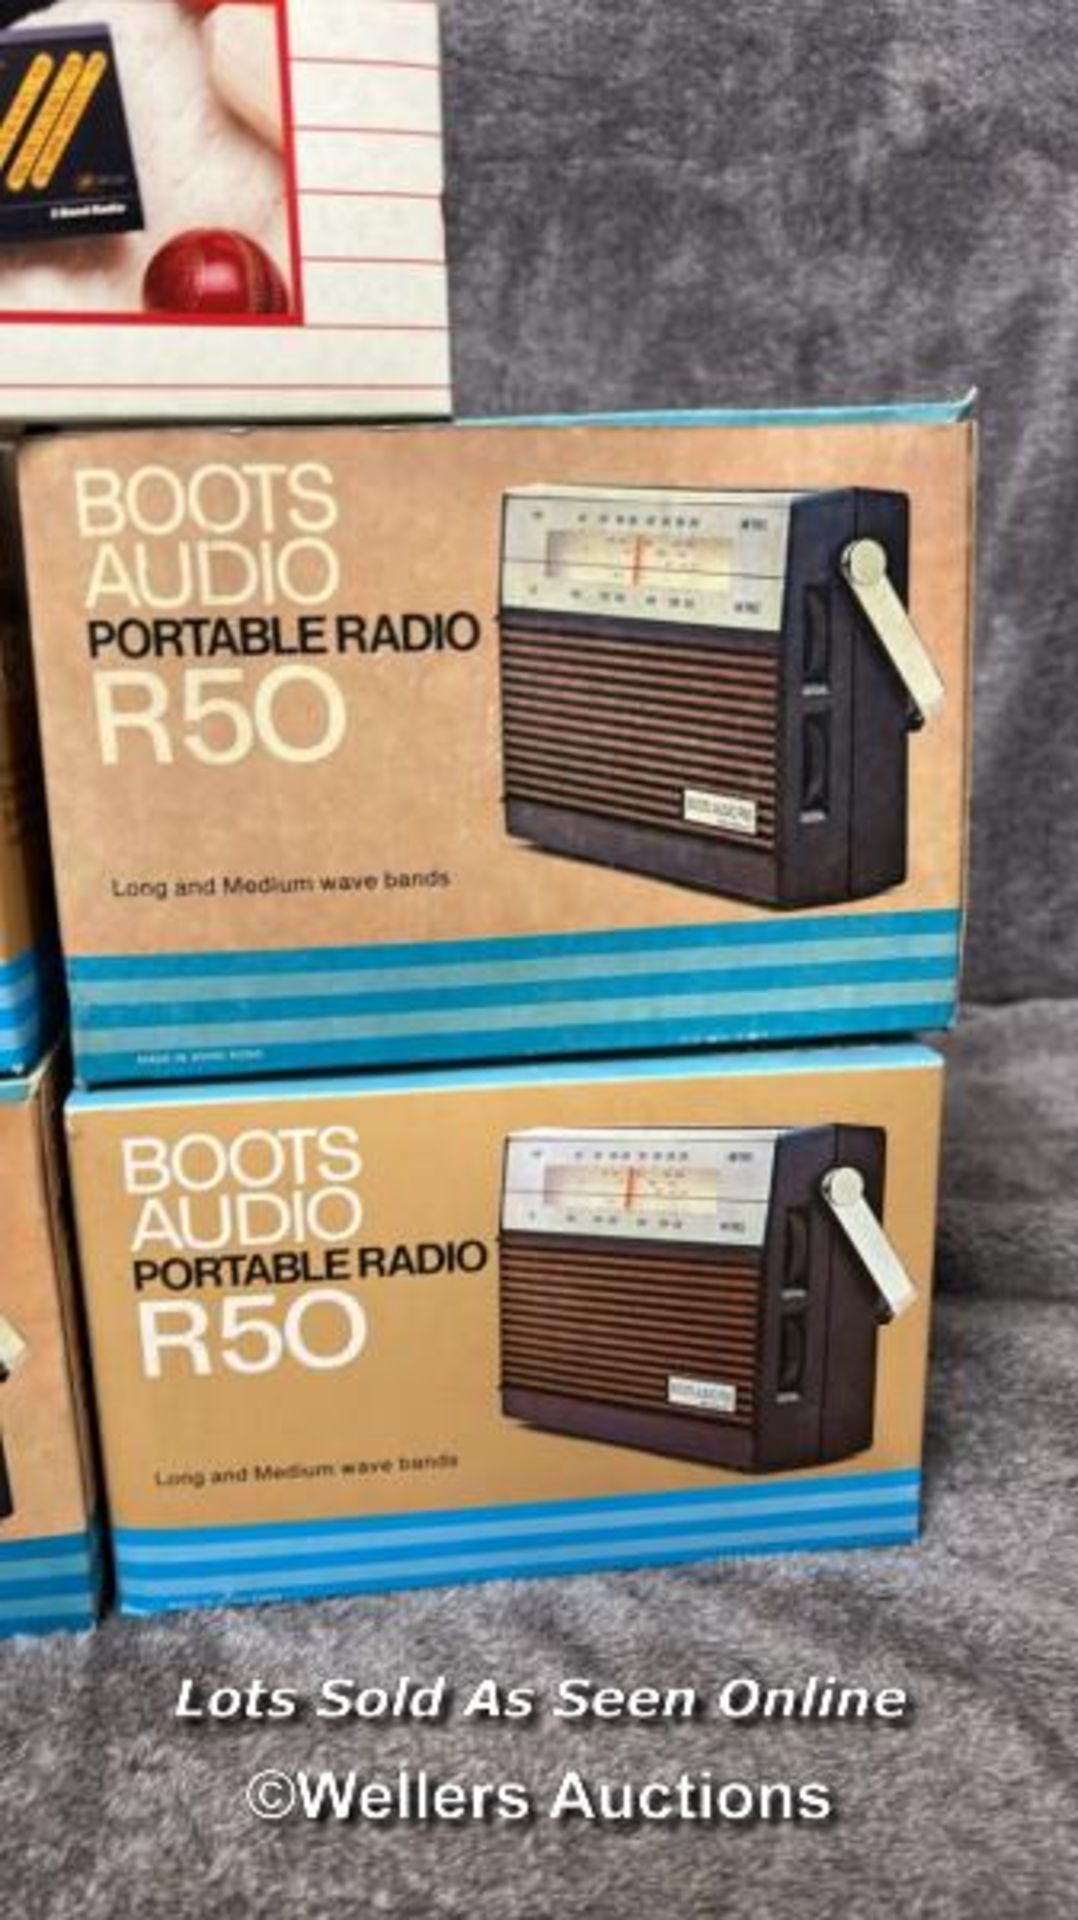 Six vintage 1980's Boots radios including four R50 models, from the private collection of the - Image 4 of 5